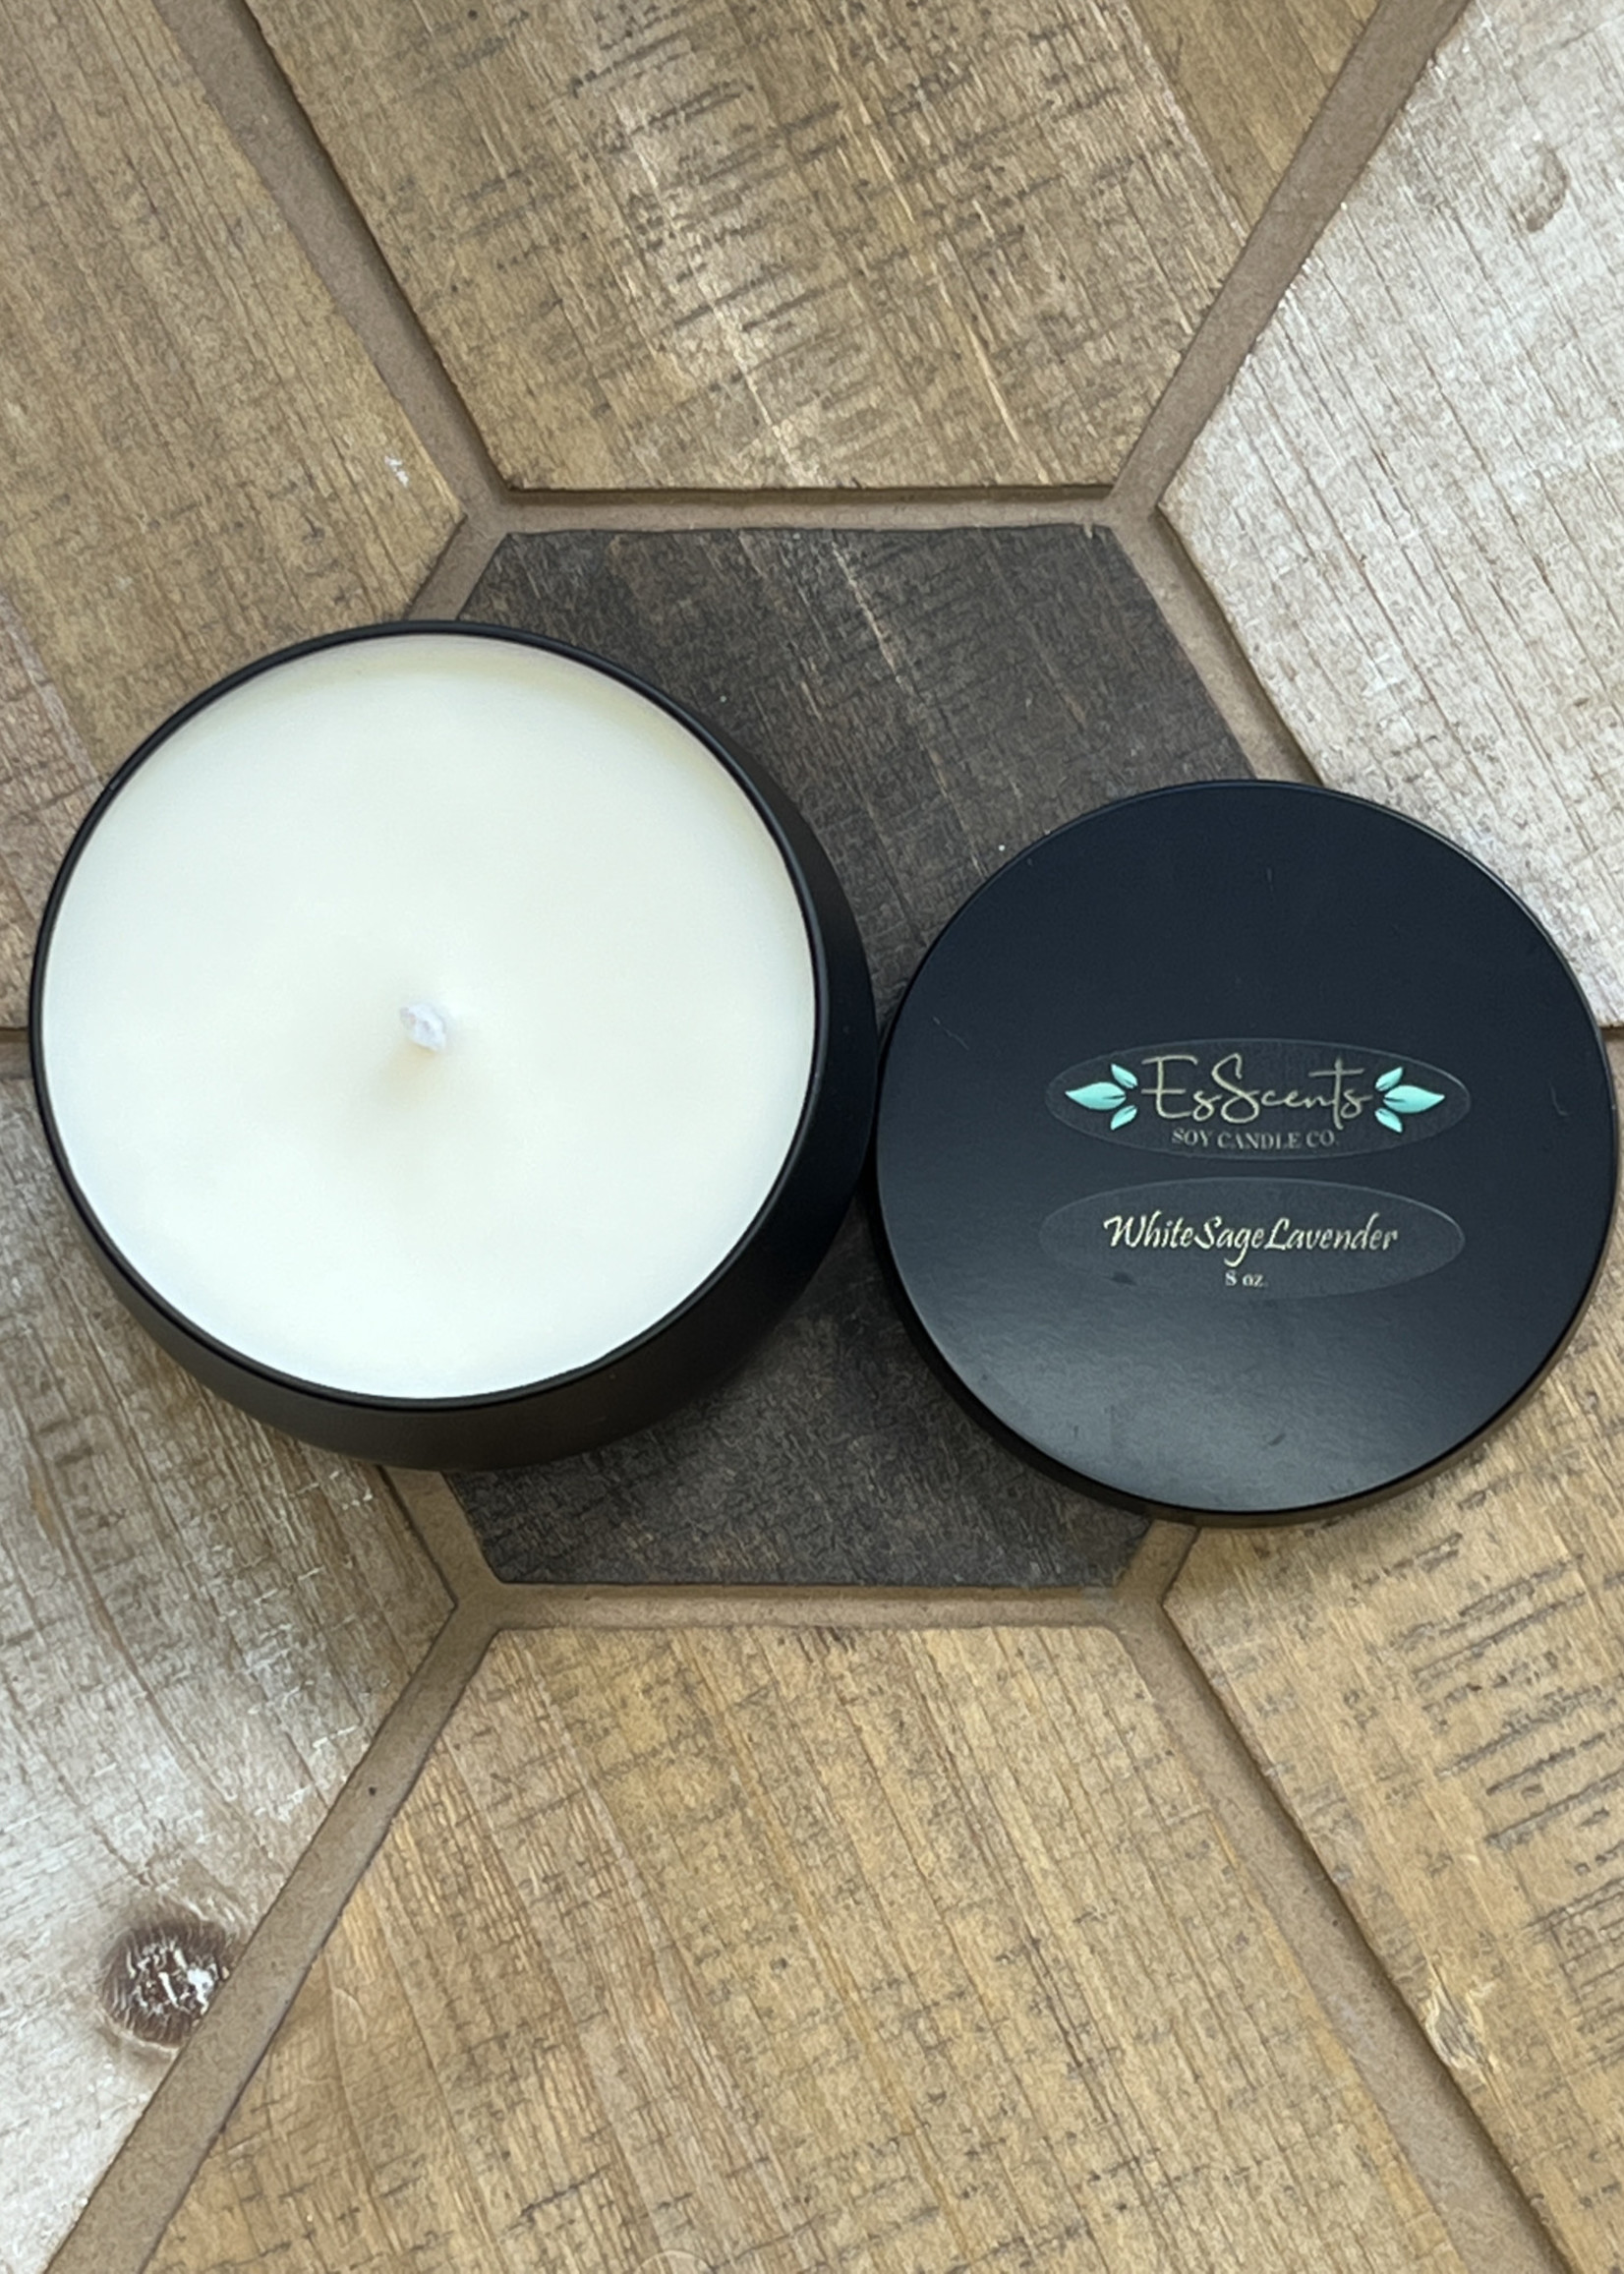 EsScents Soy Candle Co. White Sage Lavender Soy Candle 8oz